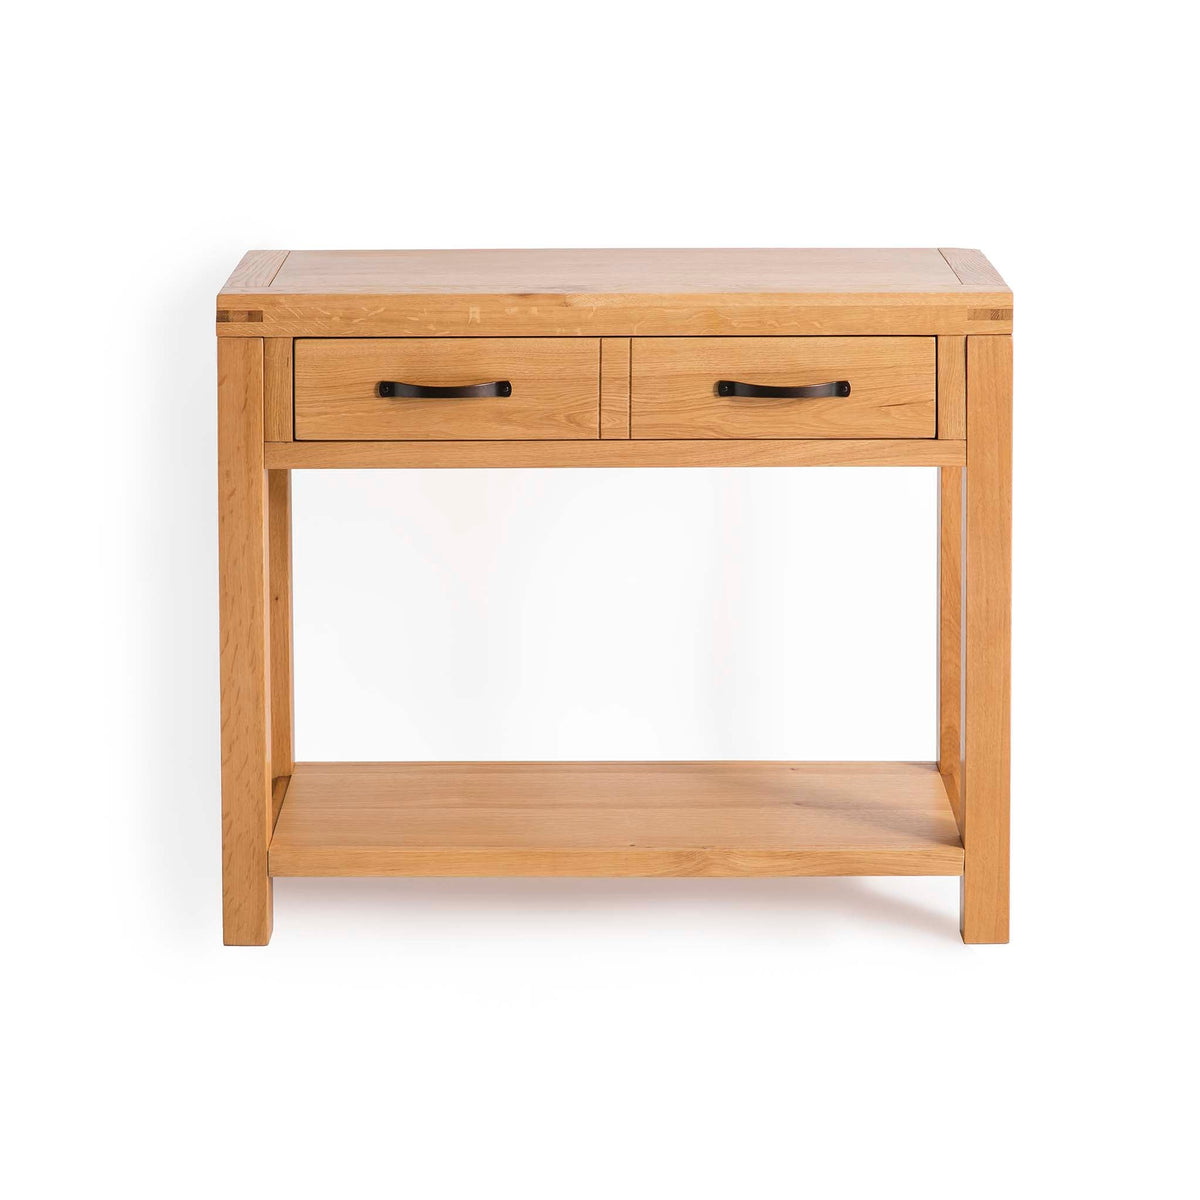  Abbey Waxed Oak Console Table with Drawer by Roseland Furniture